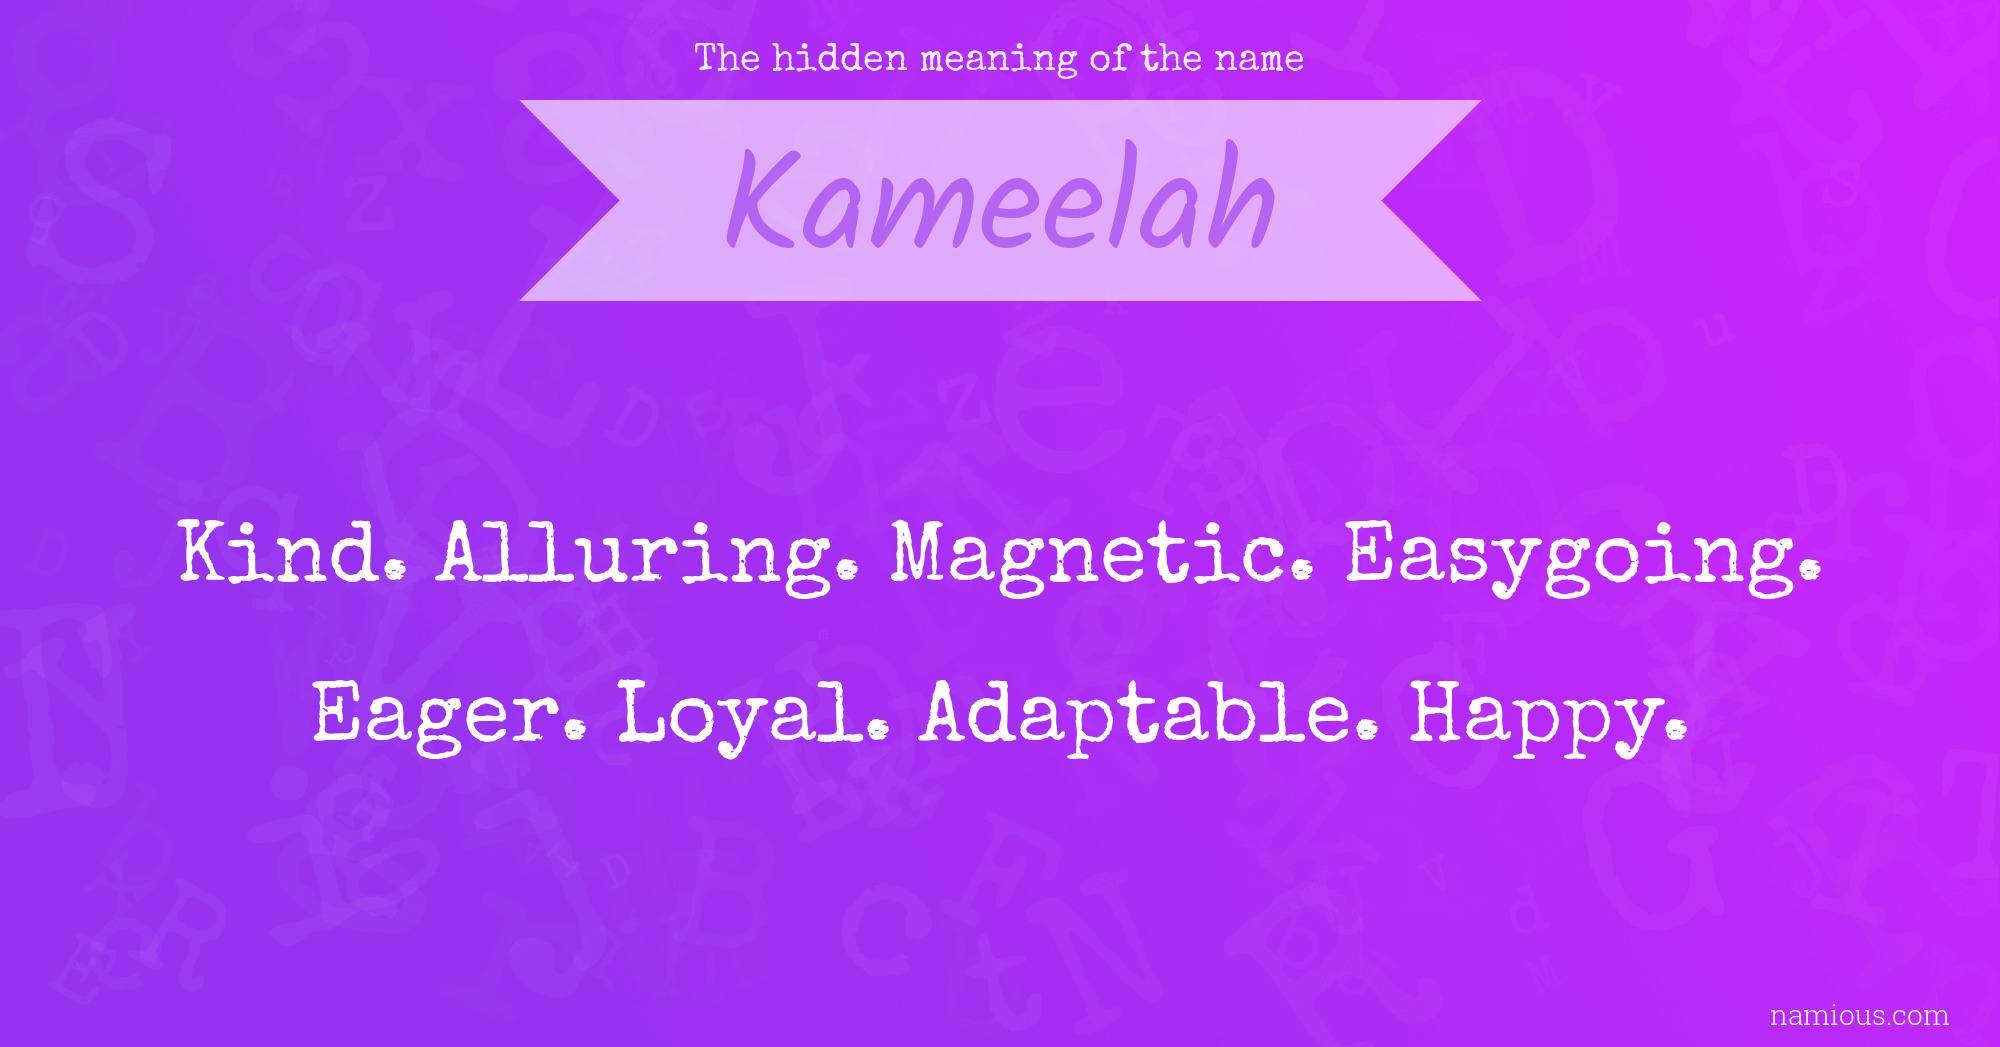 The hidden meaning of the name Kameelah